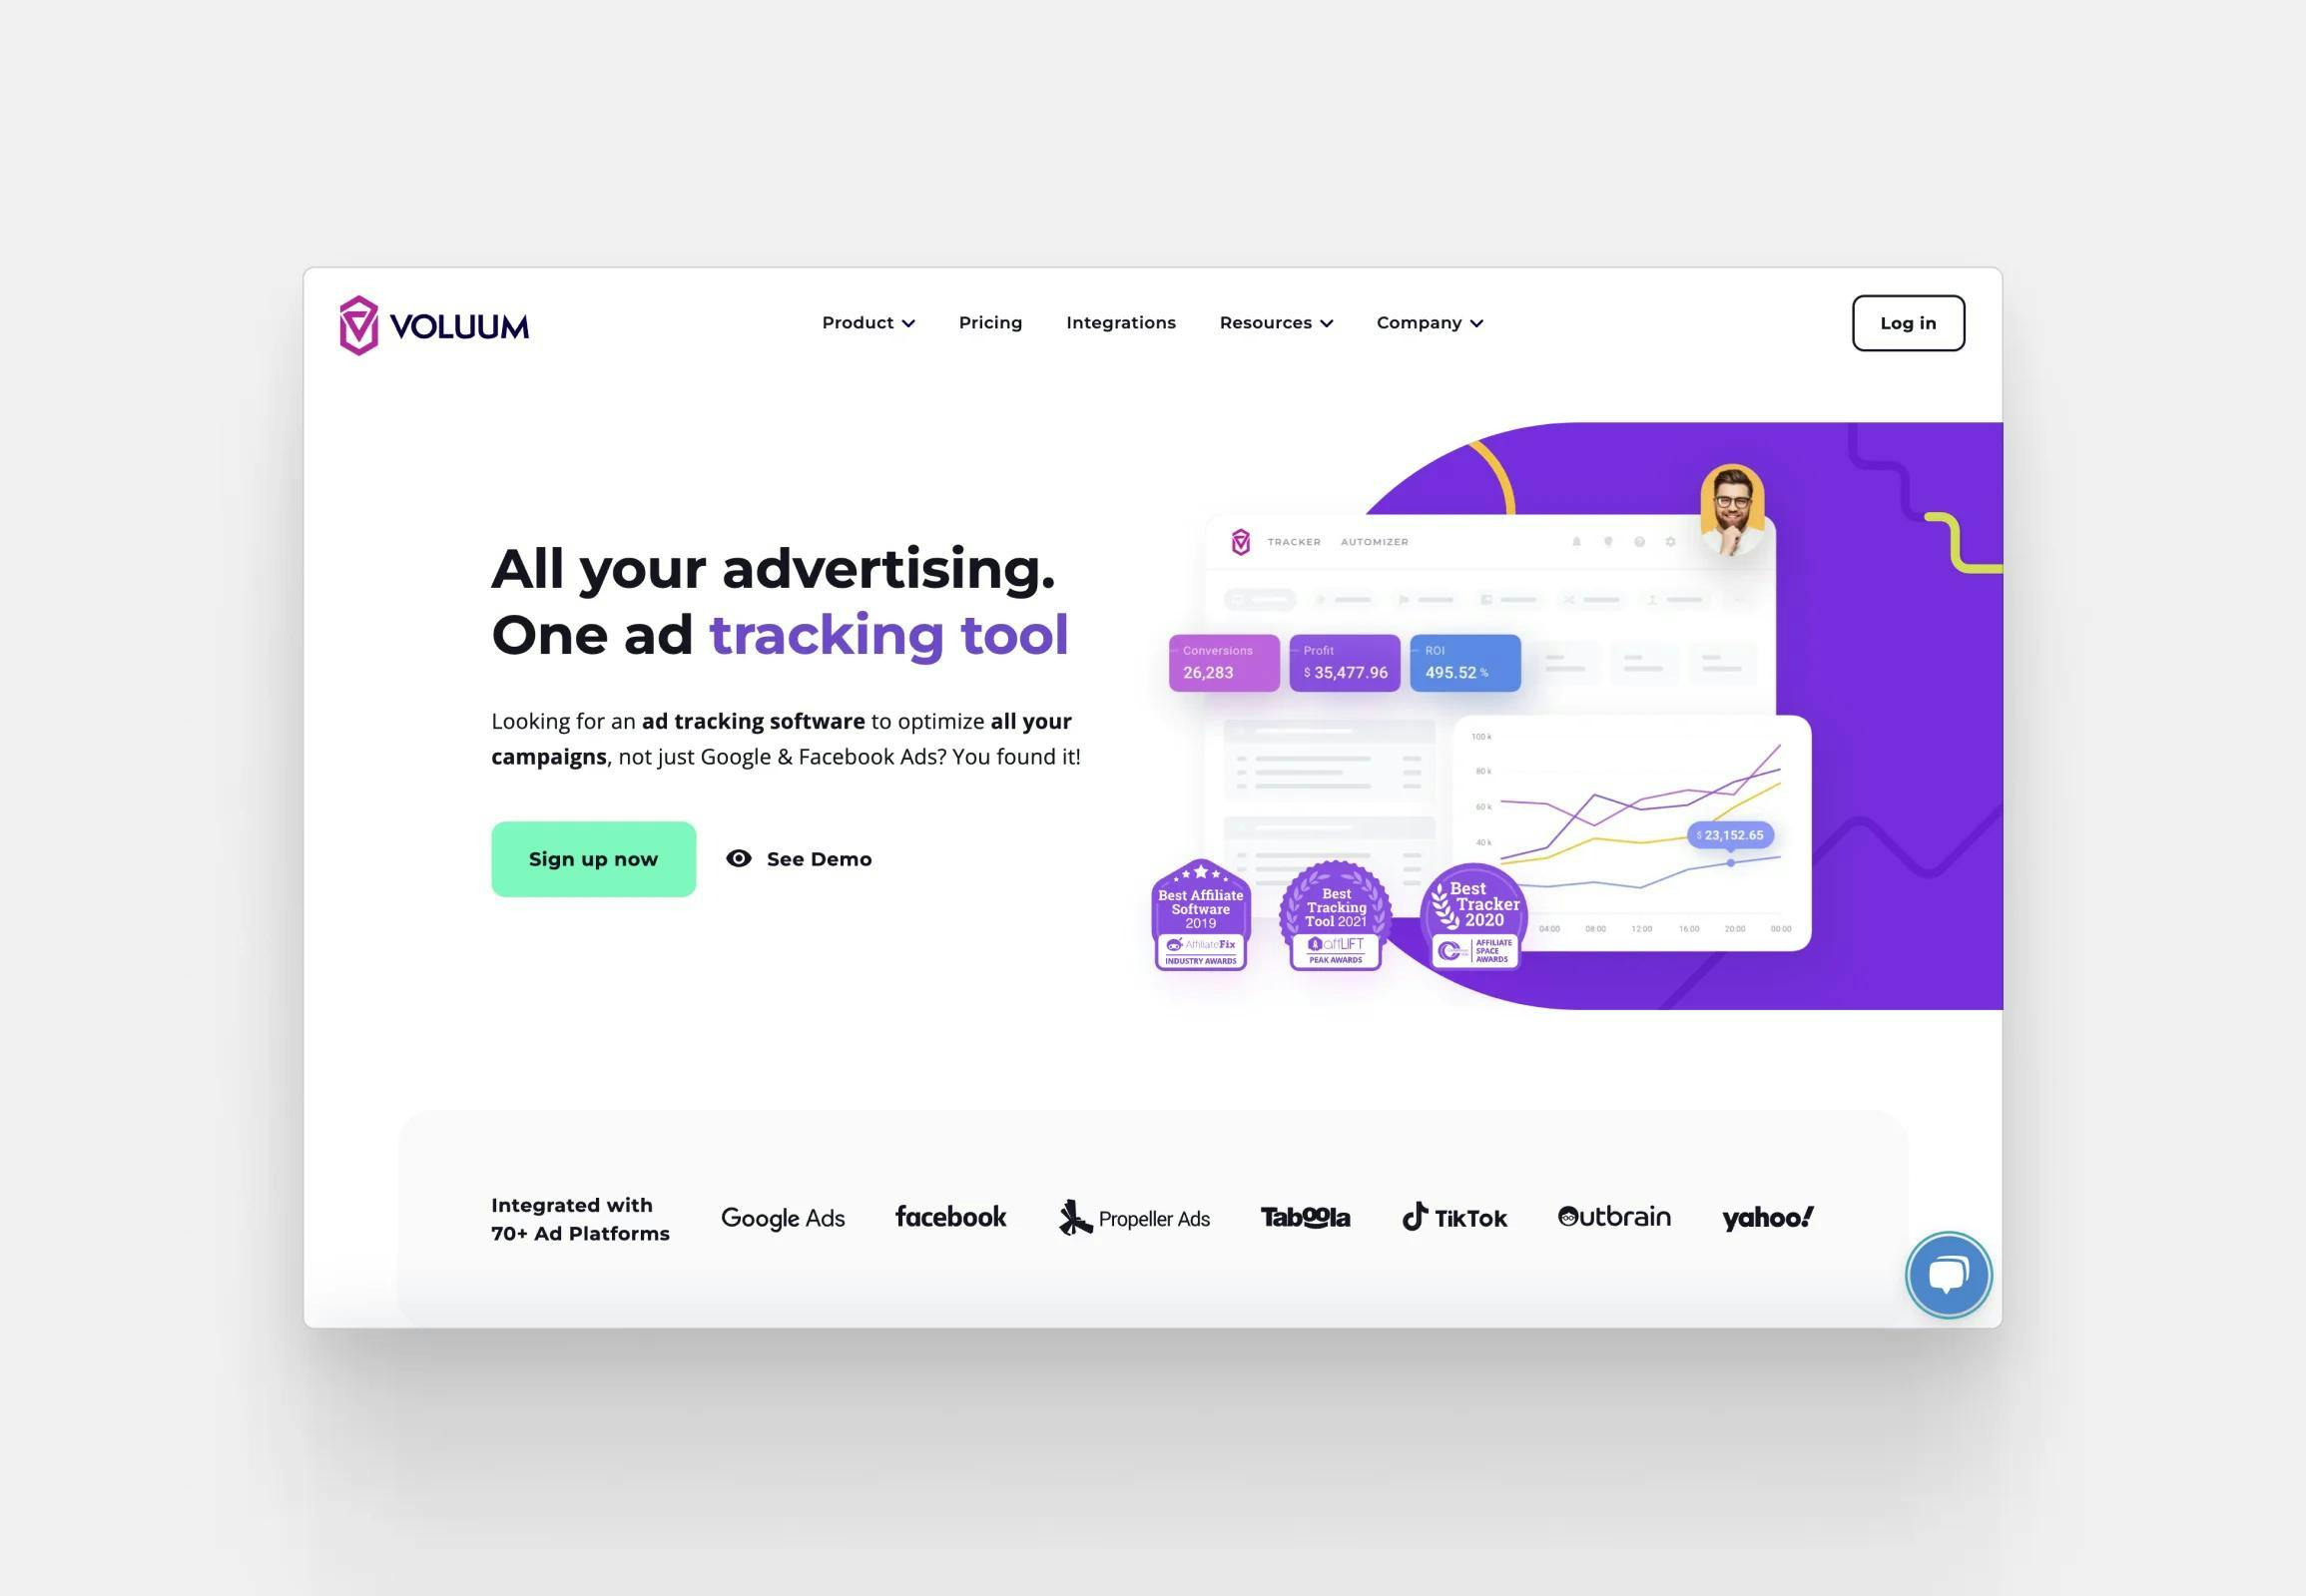 The landing page of Voluum, an ad tracking tool that helps marketers monitor their advertising campaigns